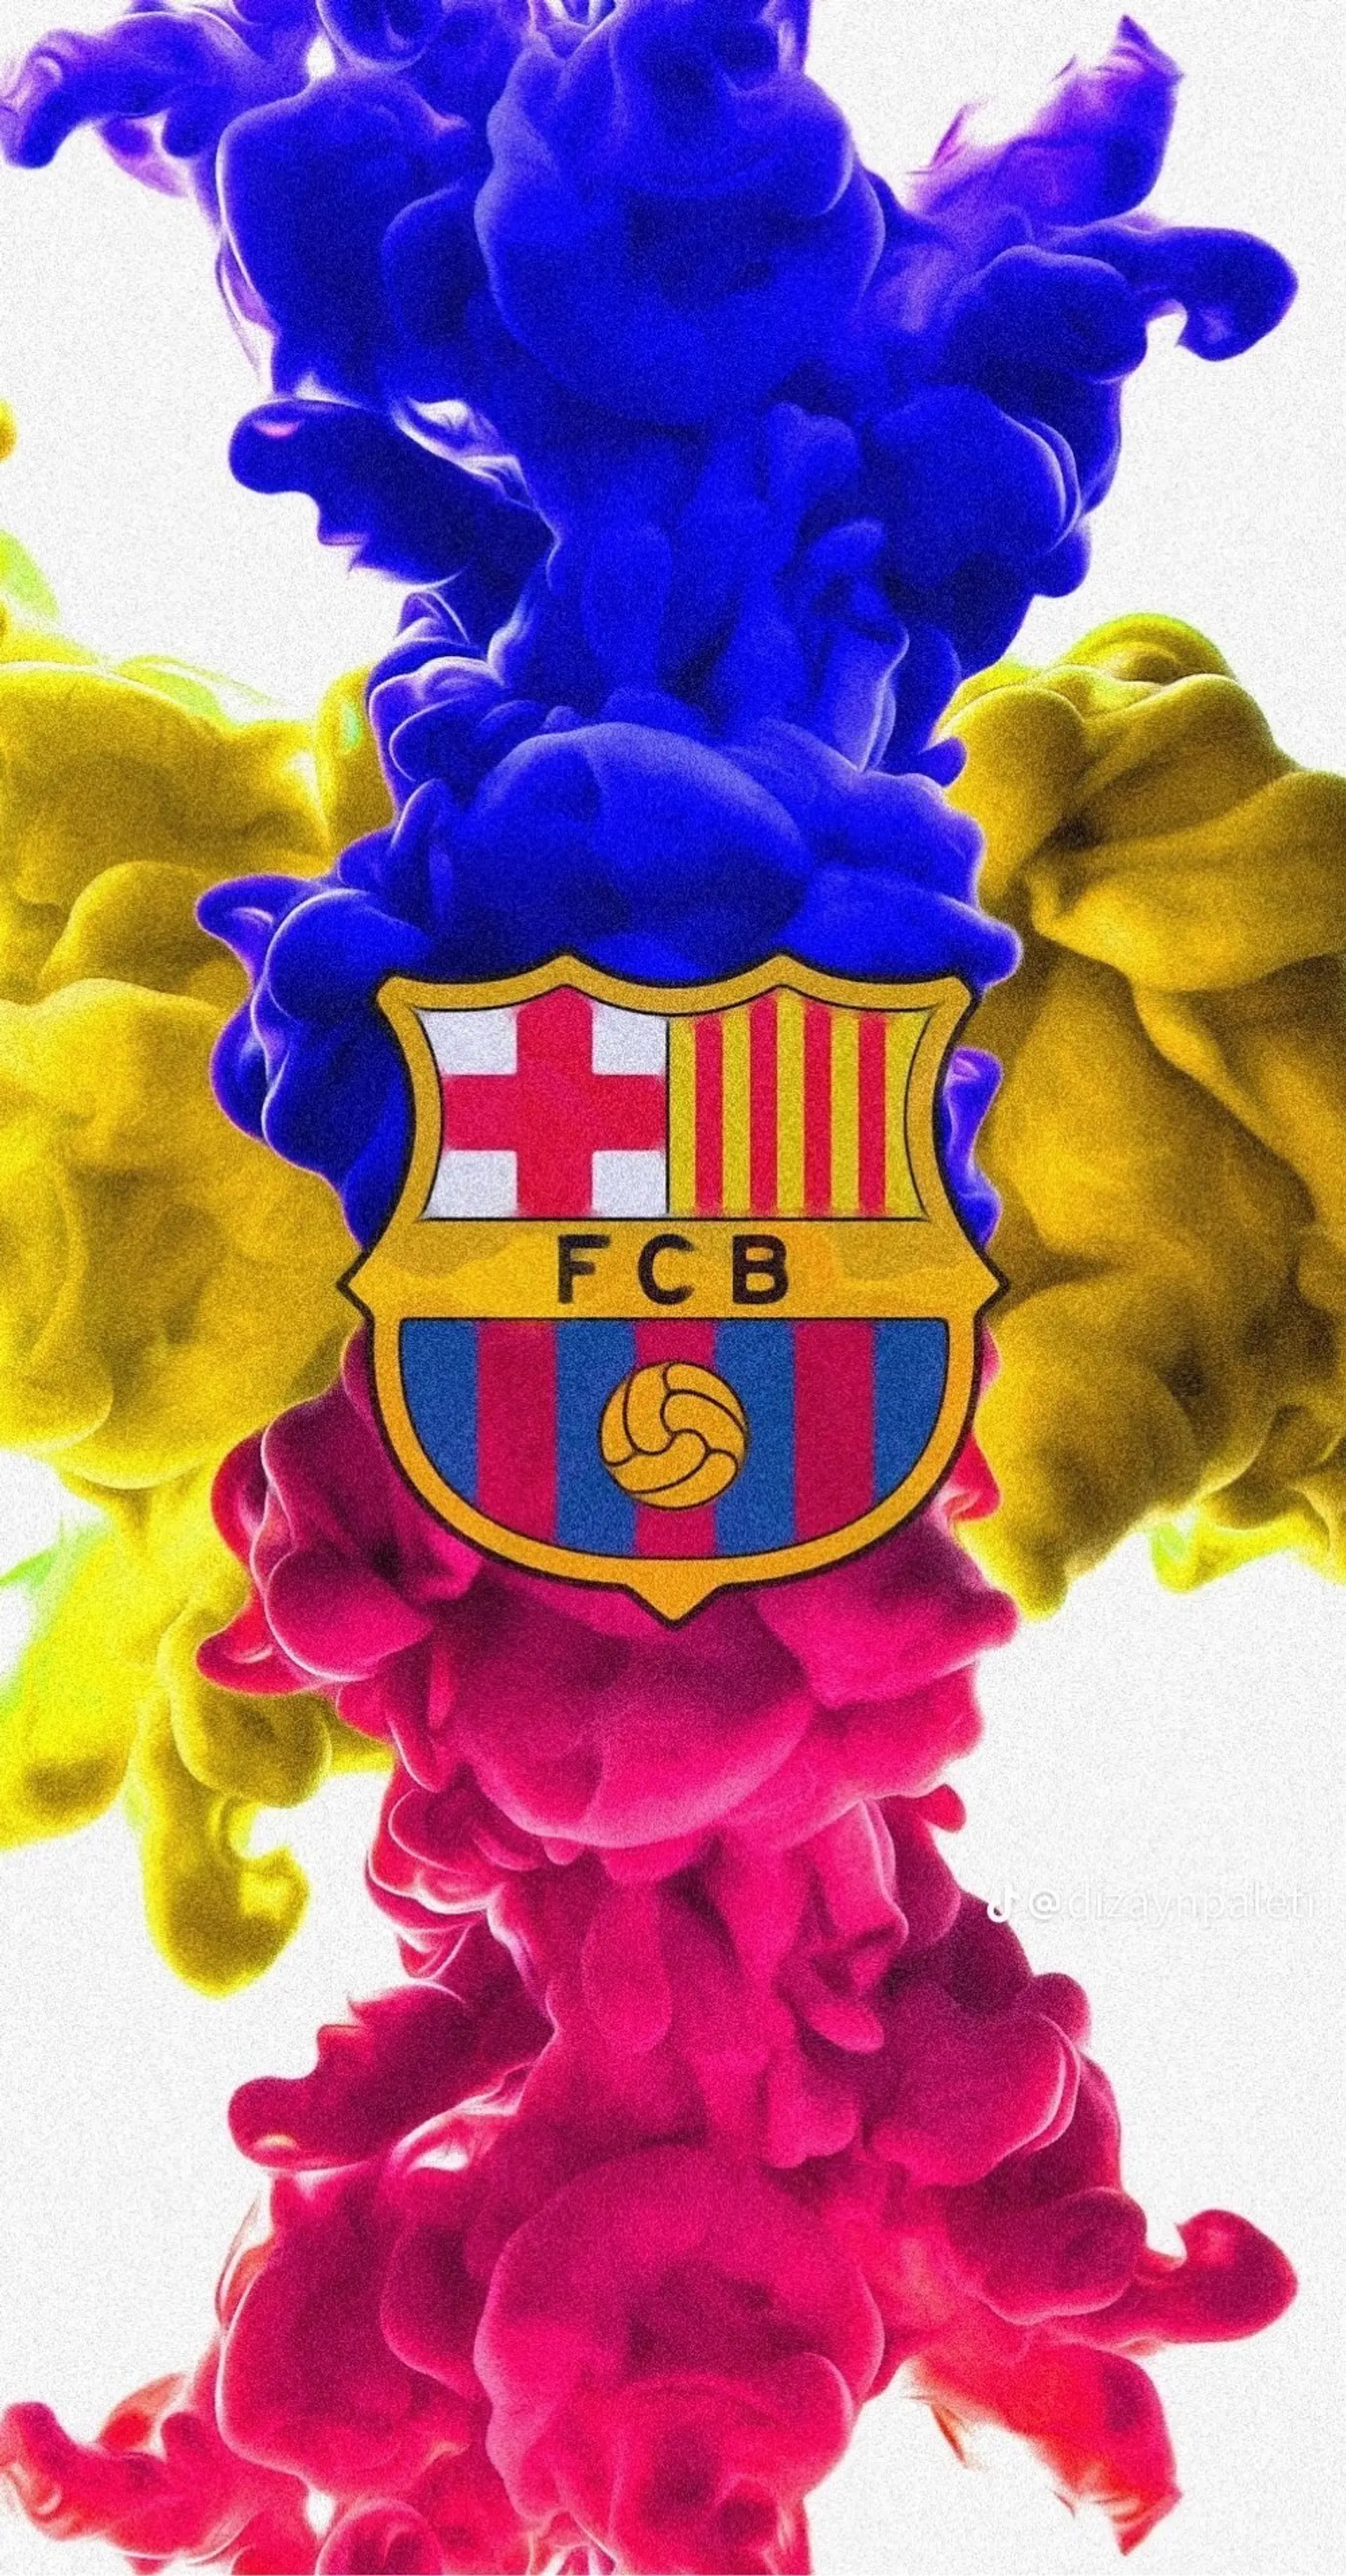 The Barcelona🔵🔴 Badge Still Remains the Best💯💯 and The Most Beautiful😍 Badge Ever 💯💯, No Doub